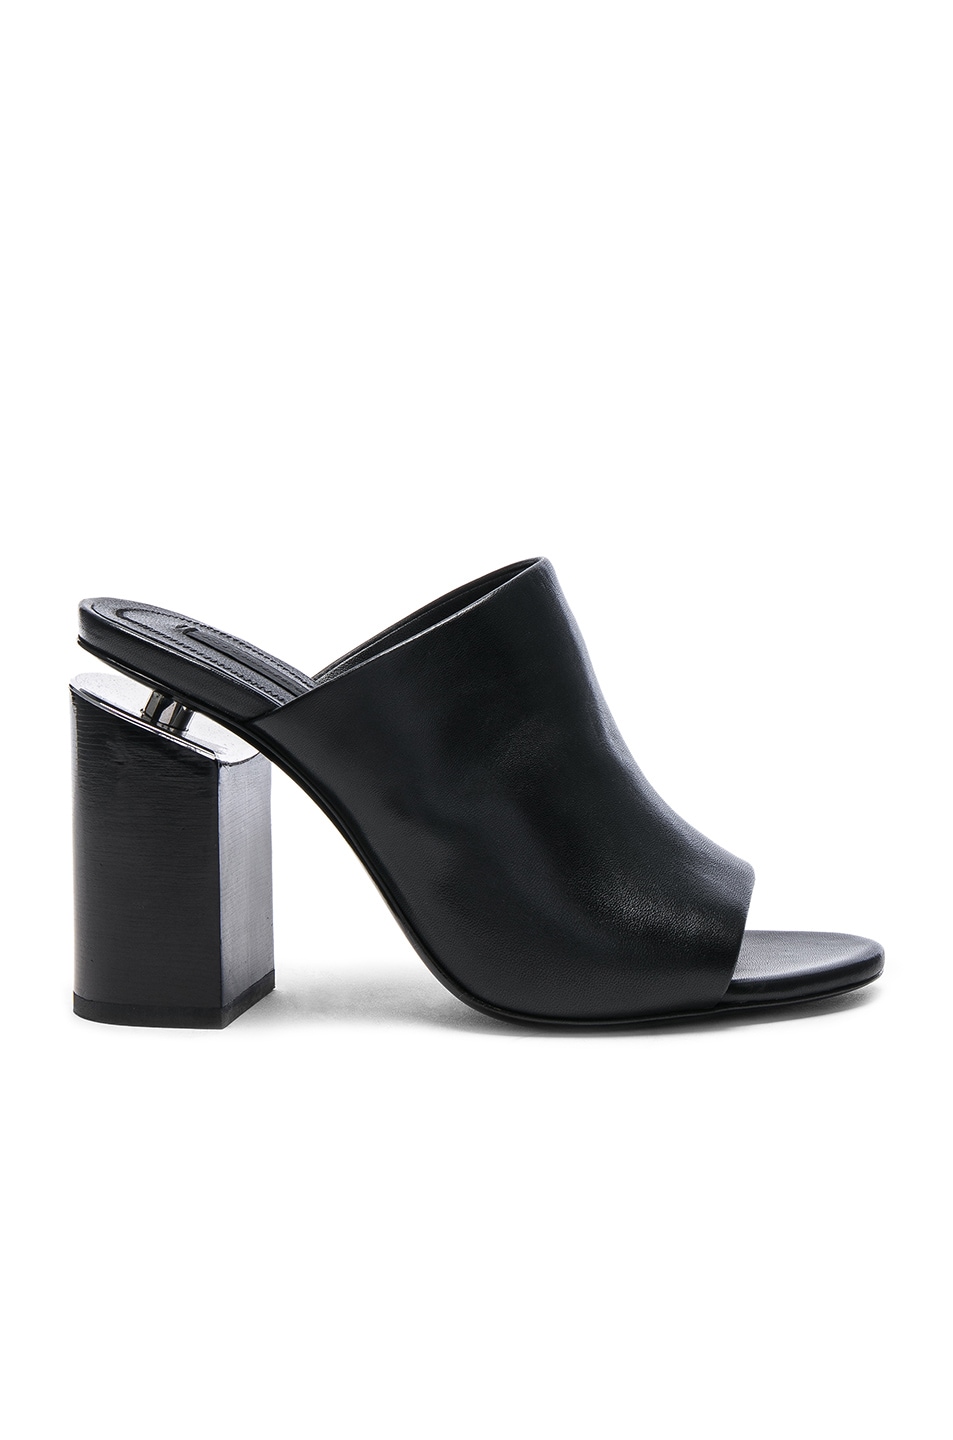 Image 1 of Alexander Wang Avery Leather Mules in Black